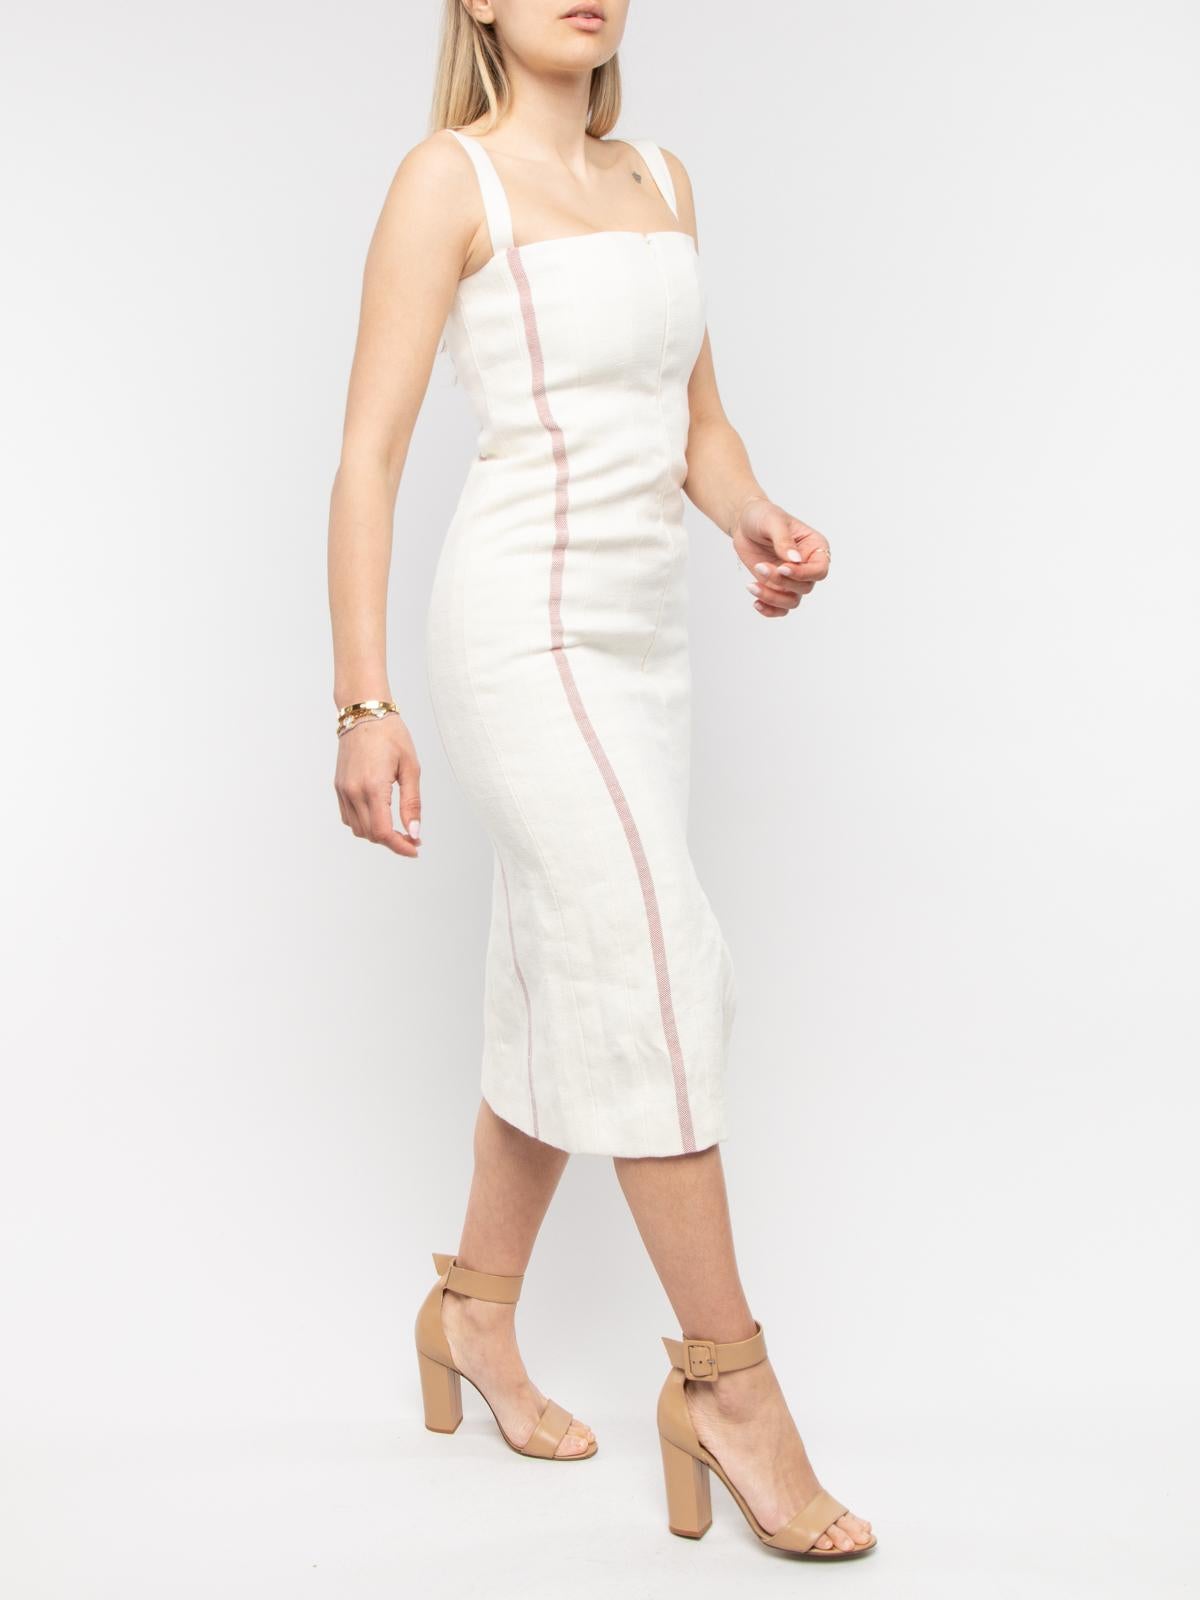 CONDITION is Very good. This garment shows very light wear to the exterior fabric. Details Zip Front Detail Linen Midi Made in Italy Composition 100% Linen Fitting Information Length: 112 cm 44 in Bust: 37 cm 14 in Model Measurements Bust: 80cm /